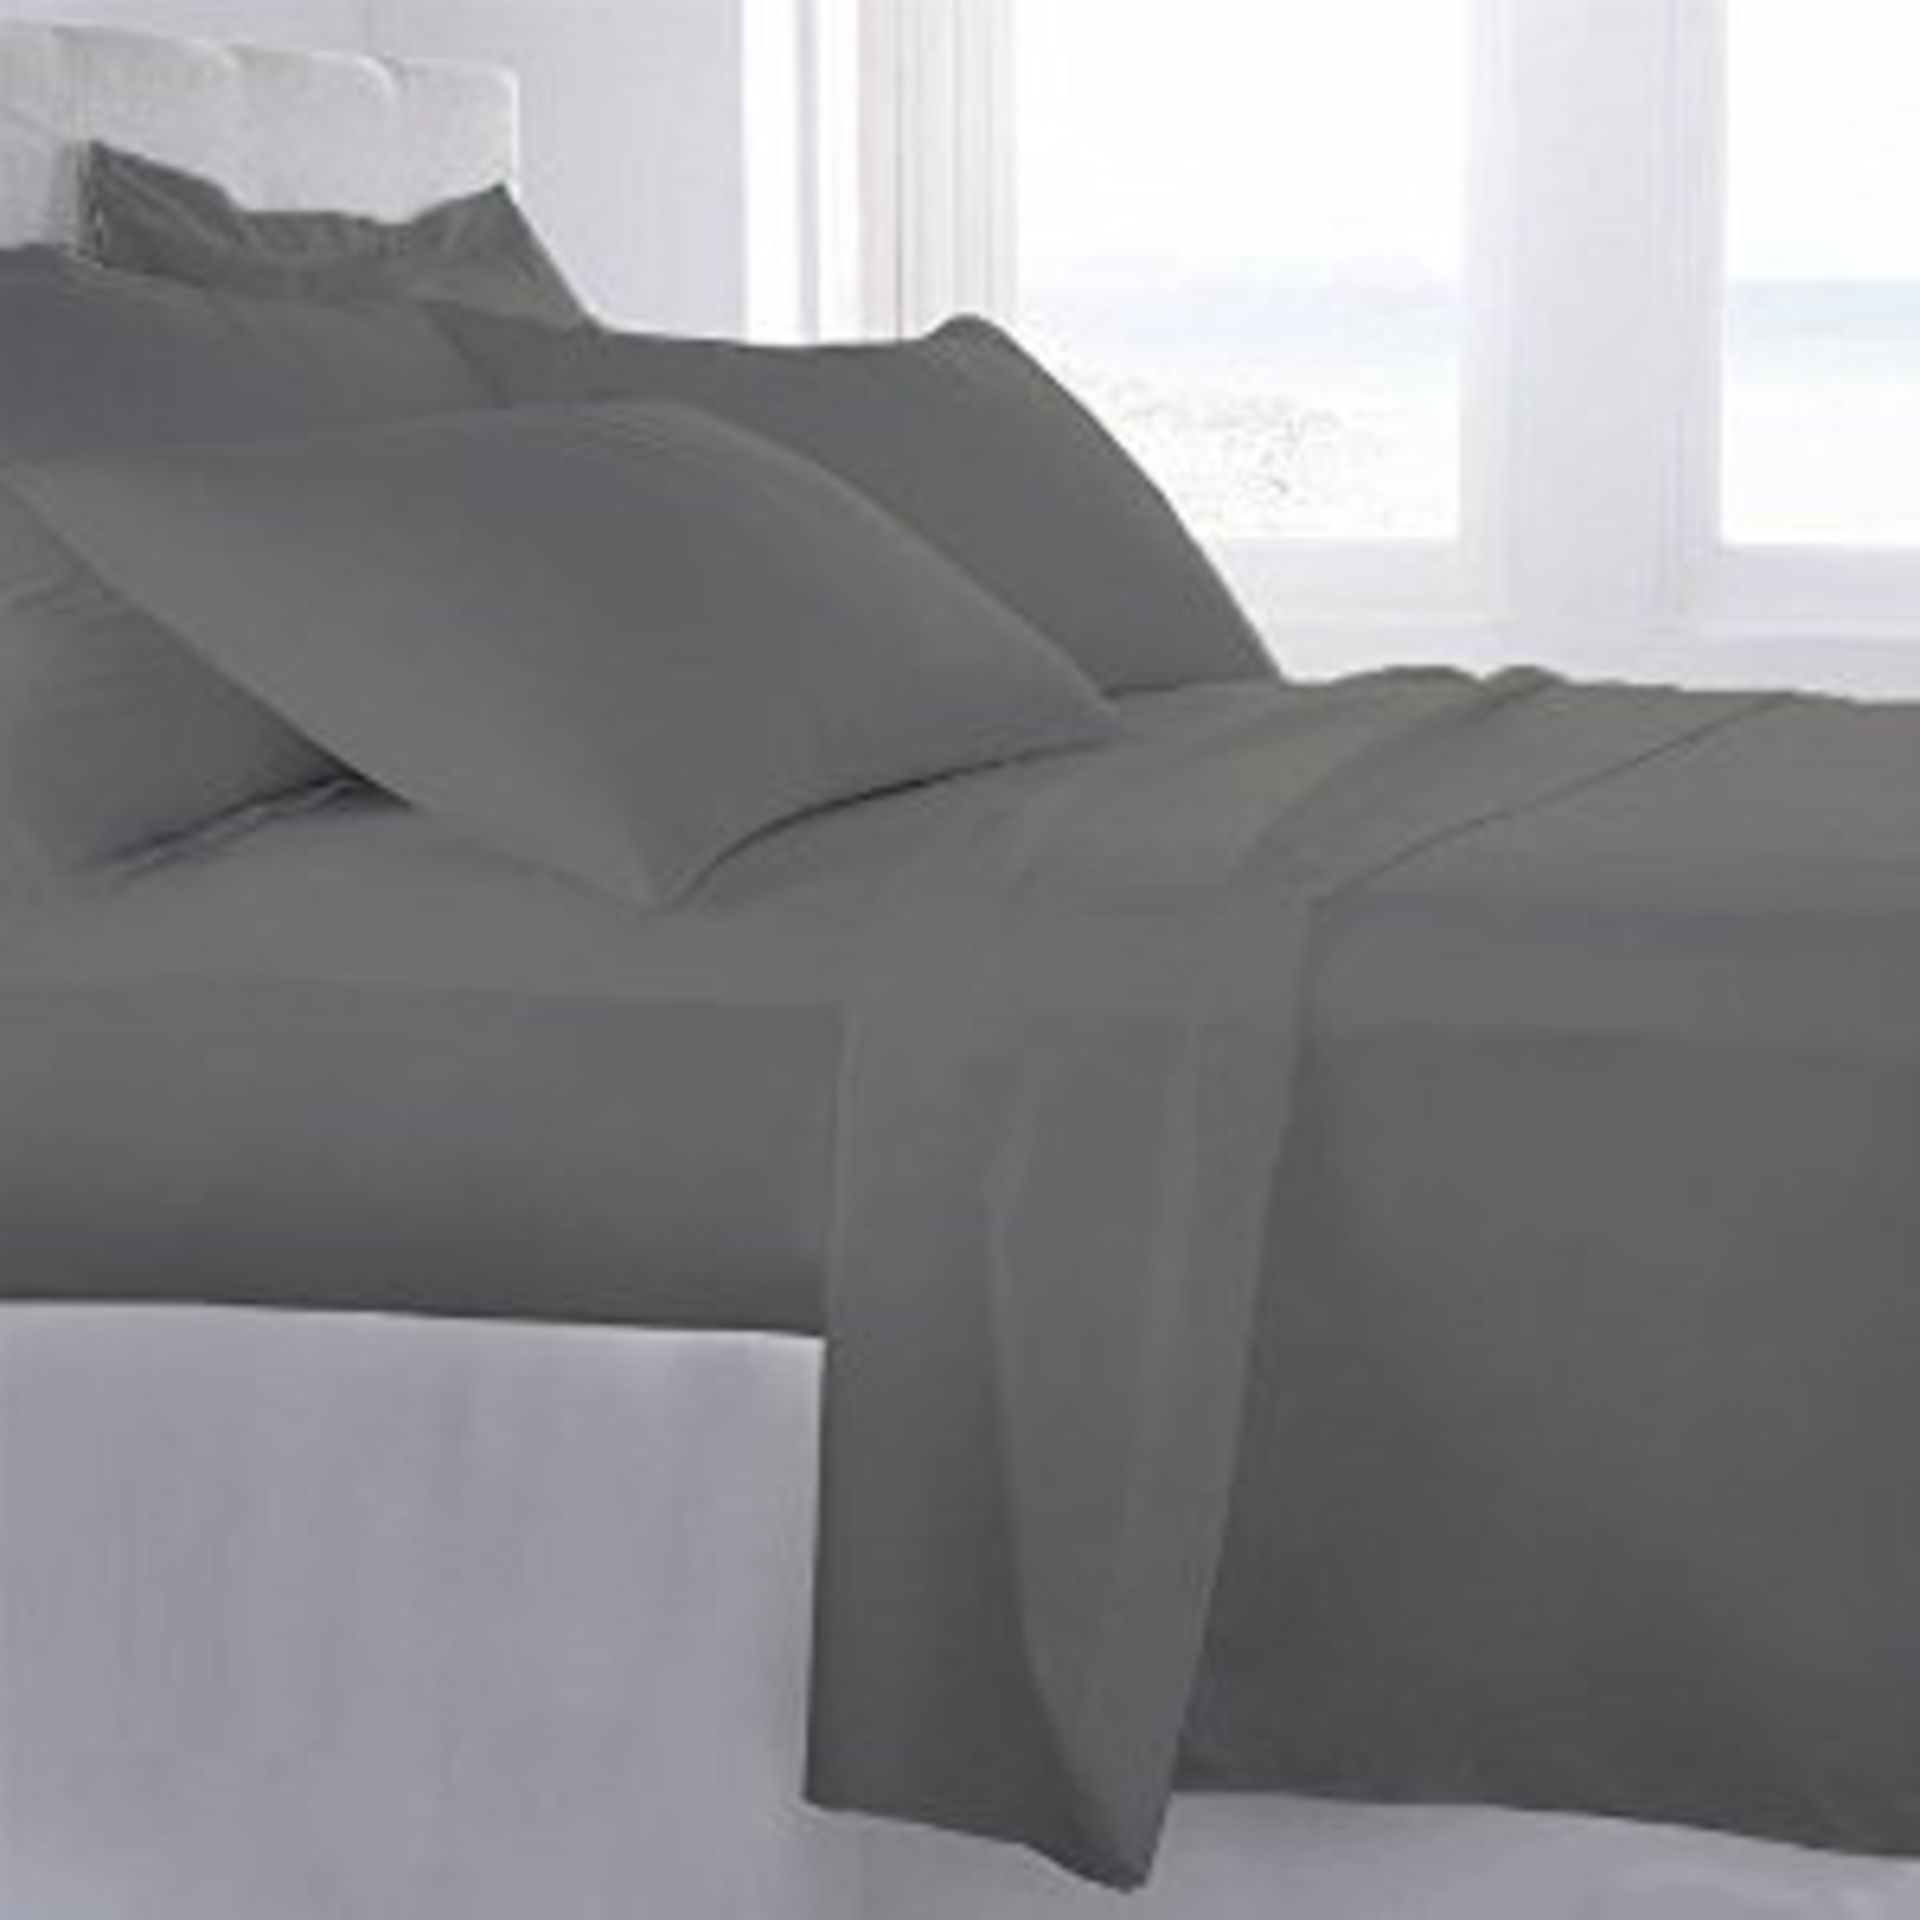 V King Size Cotton Fitted Sheet Grey - Image 2 of 2